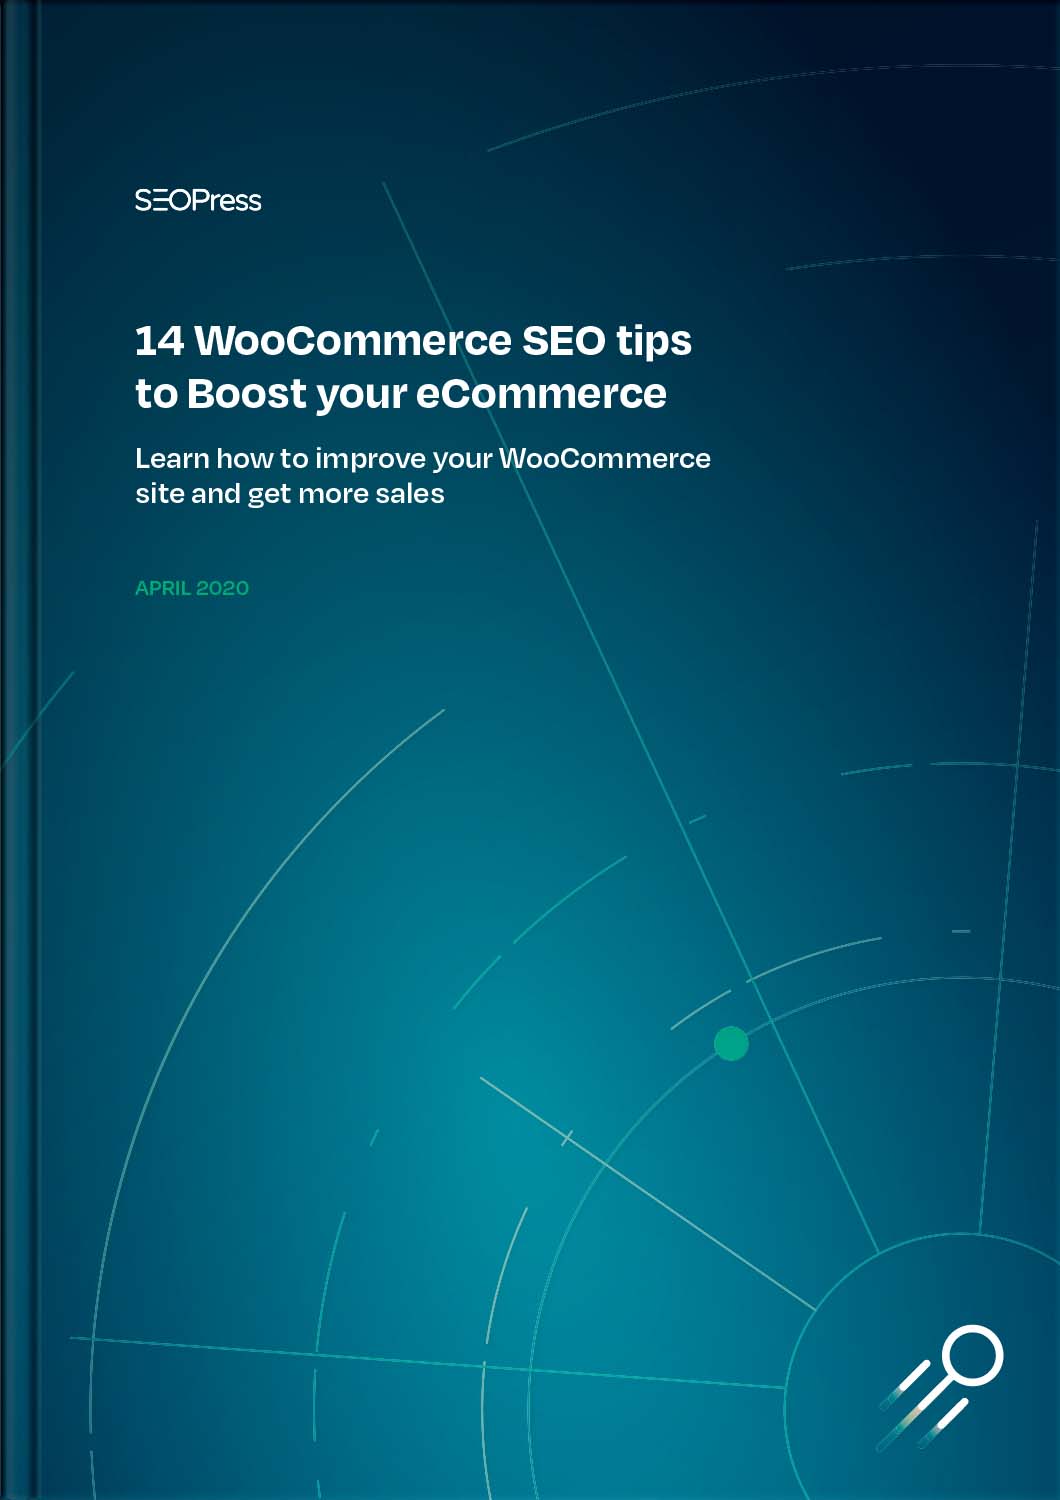 14 WooCommerce SEO tips to Boost your eCommerce